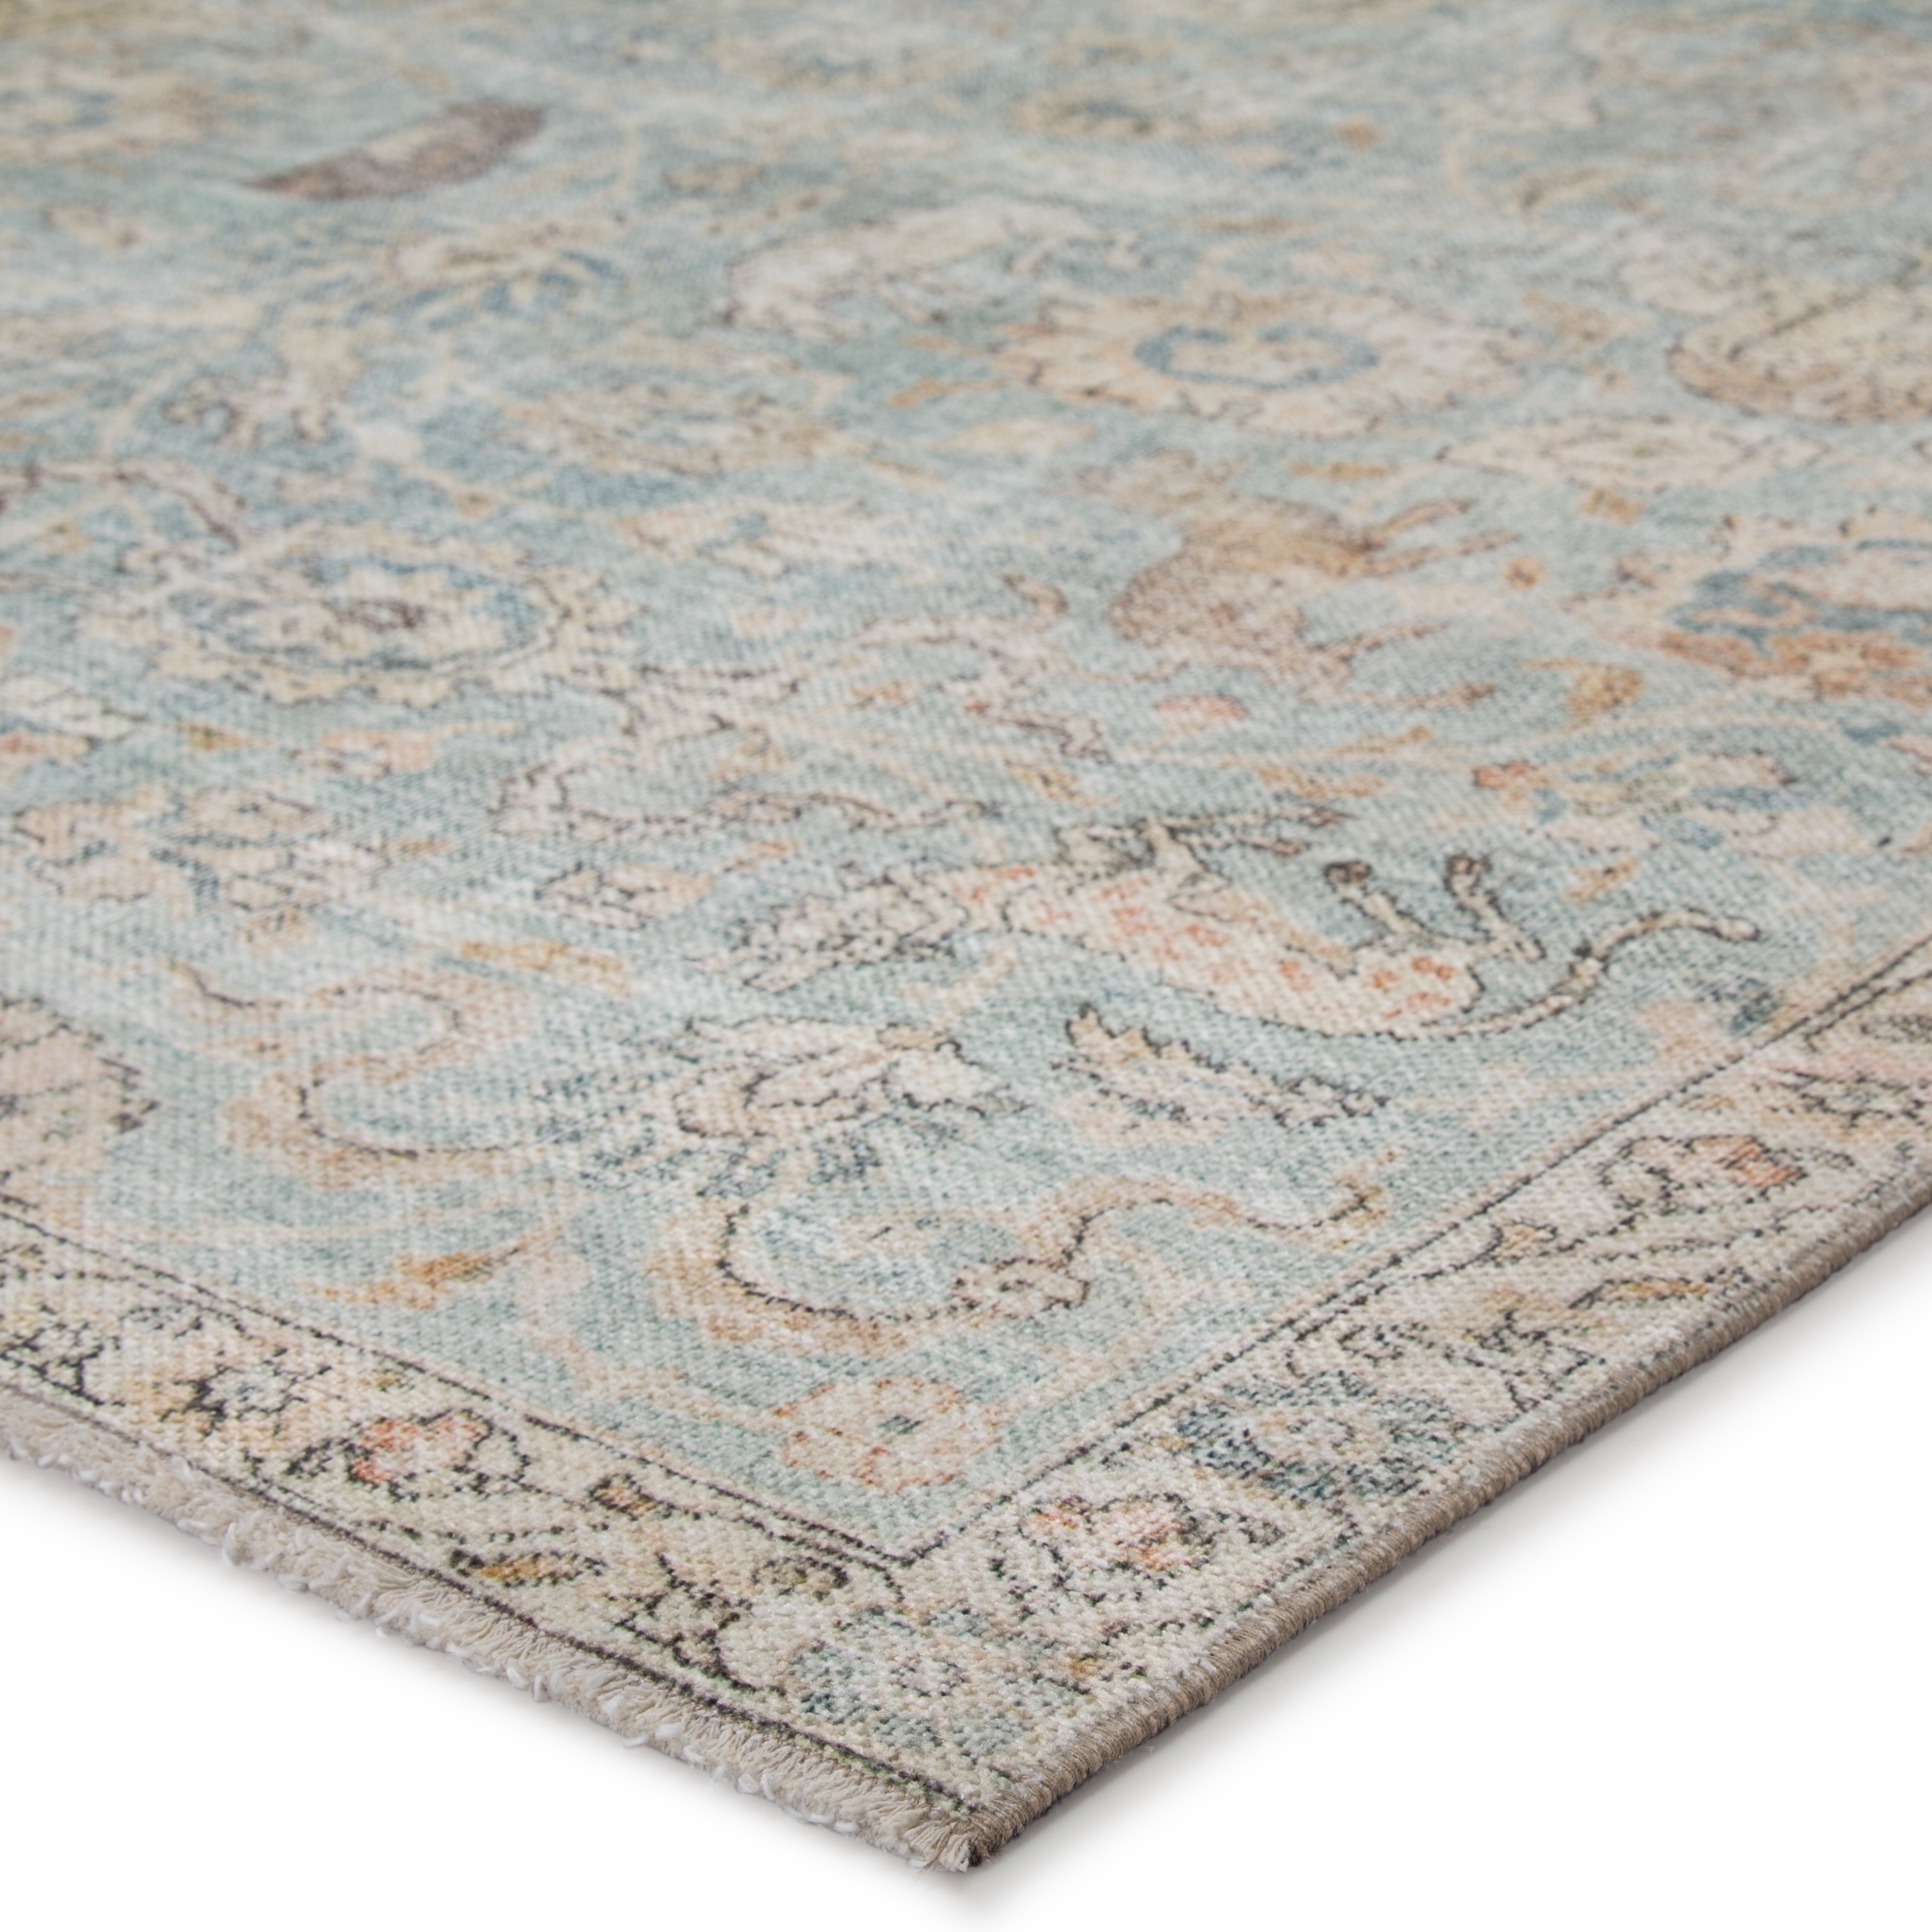 Stag Oriental Teal/ Gold Area Rug (6'X9') - Image 1